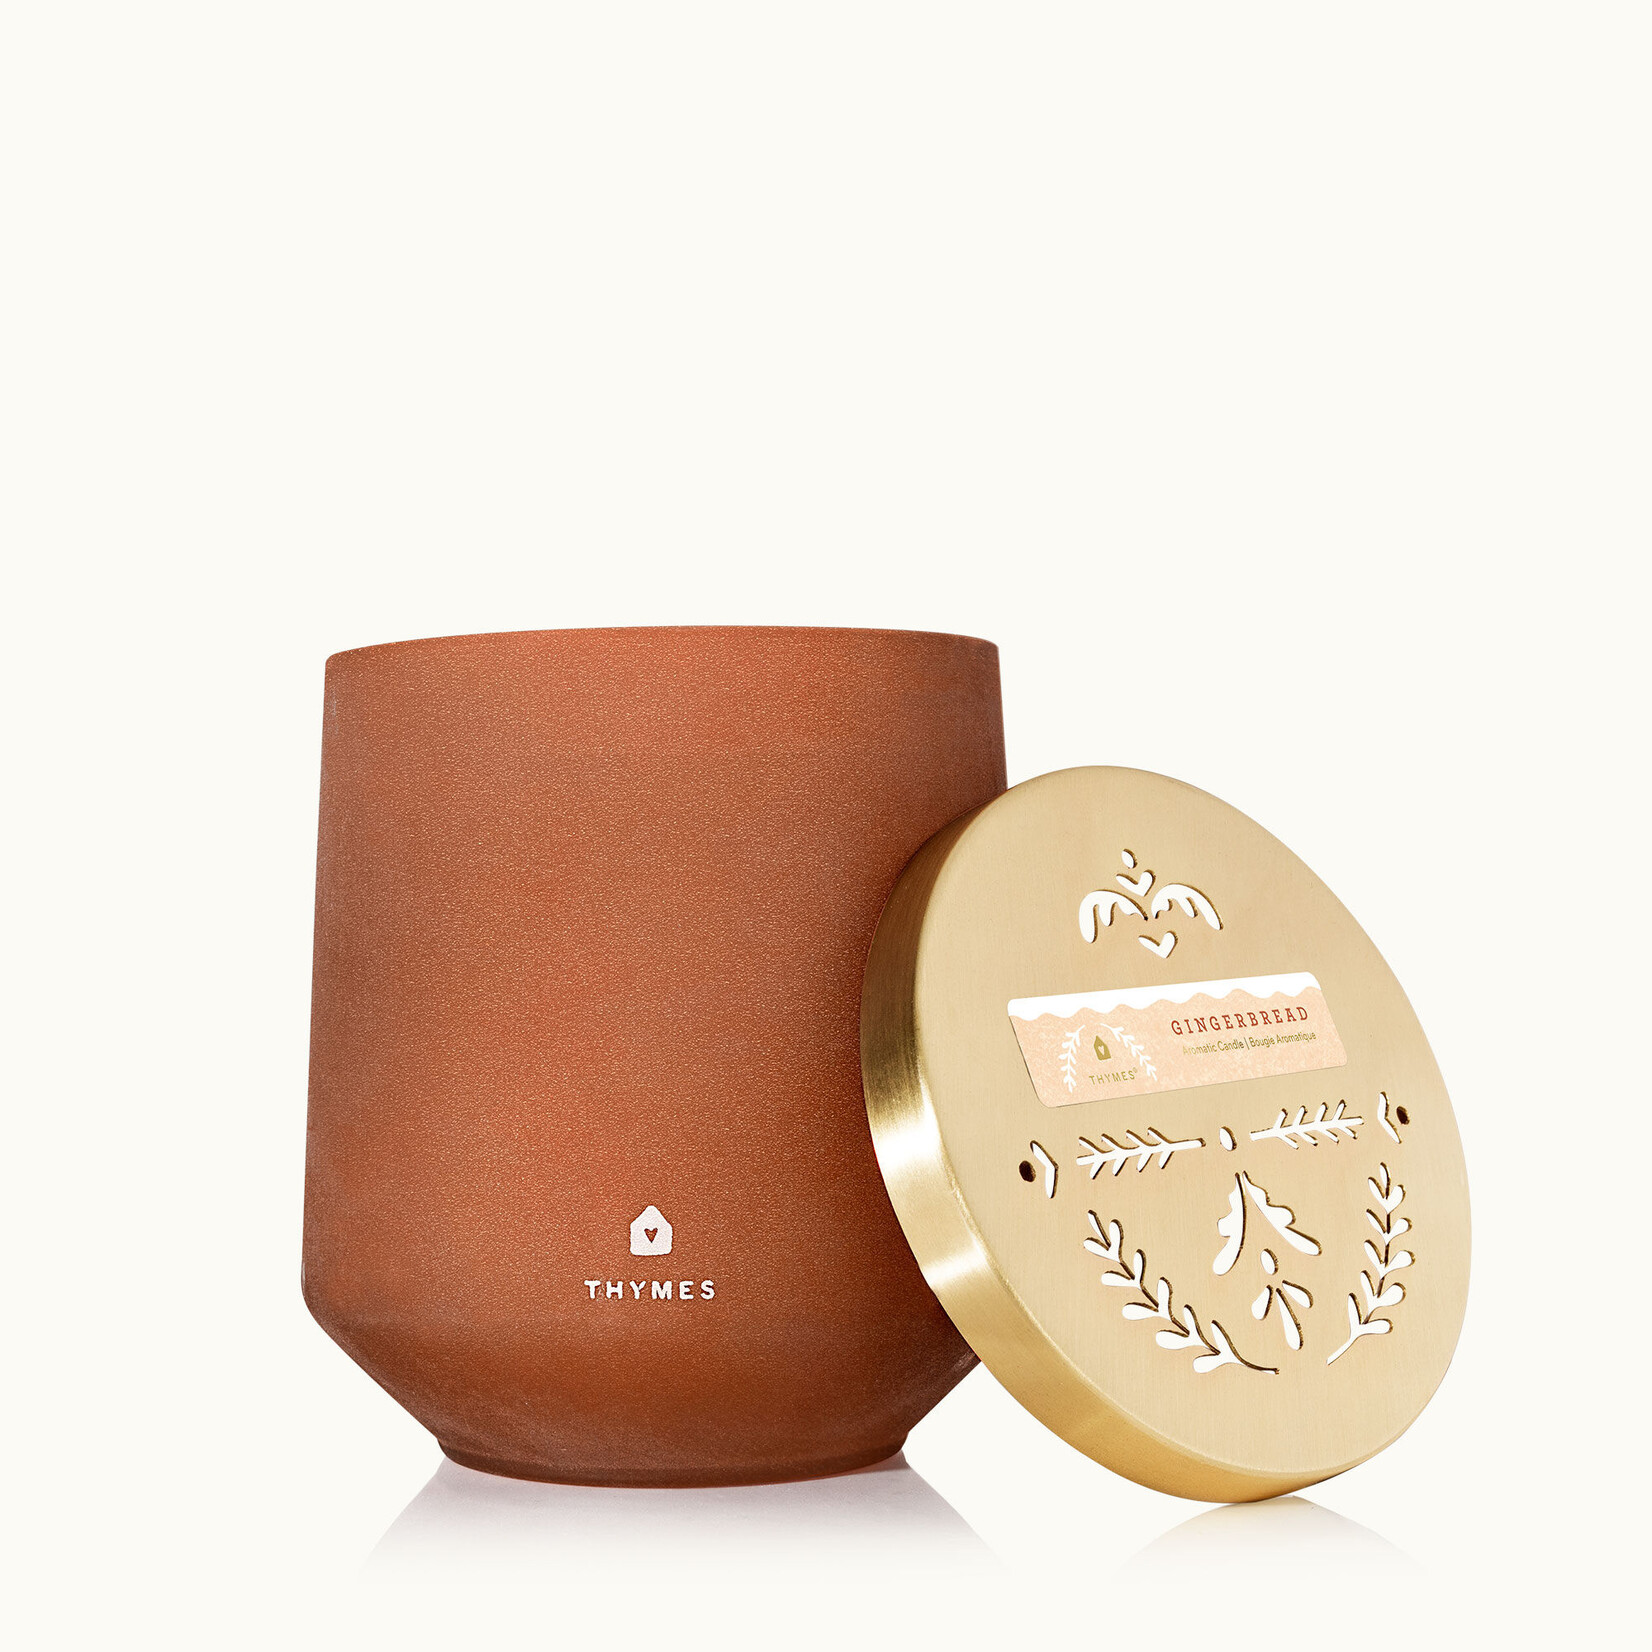 Thymes Gingerbread Large Poured Candle